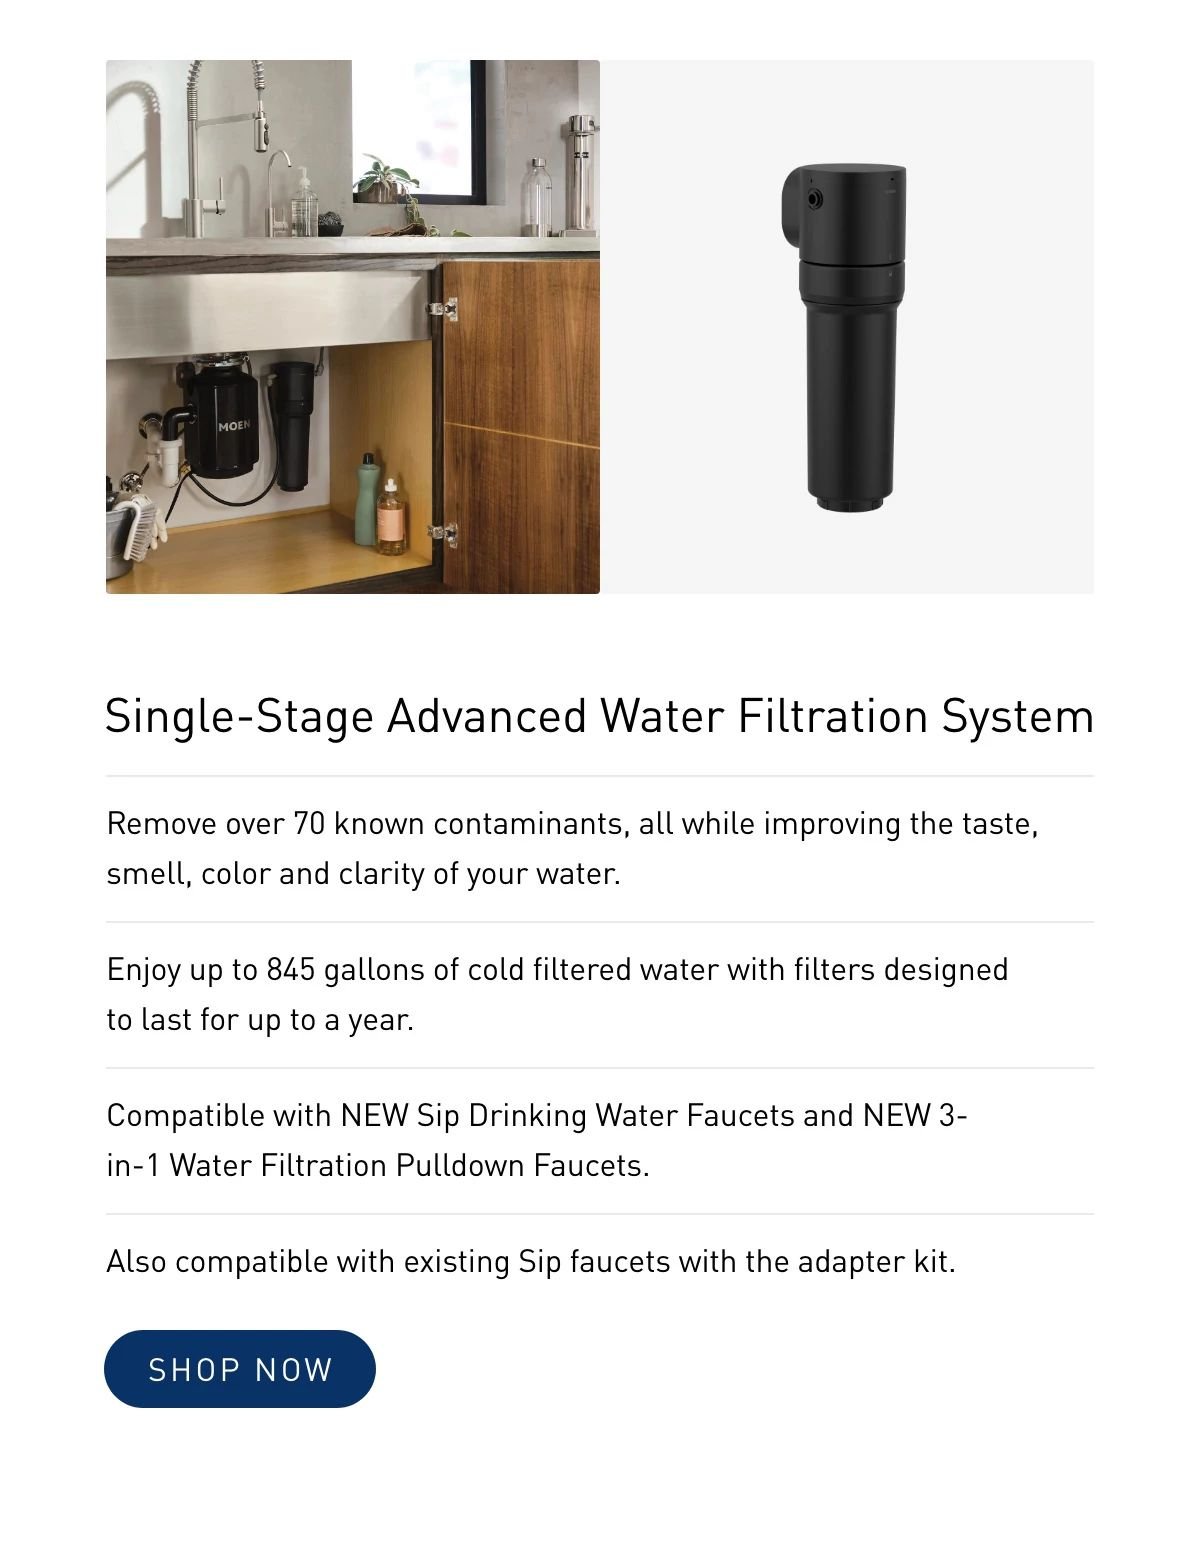 Single-Stage Advanced Water Filtration System